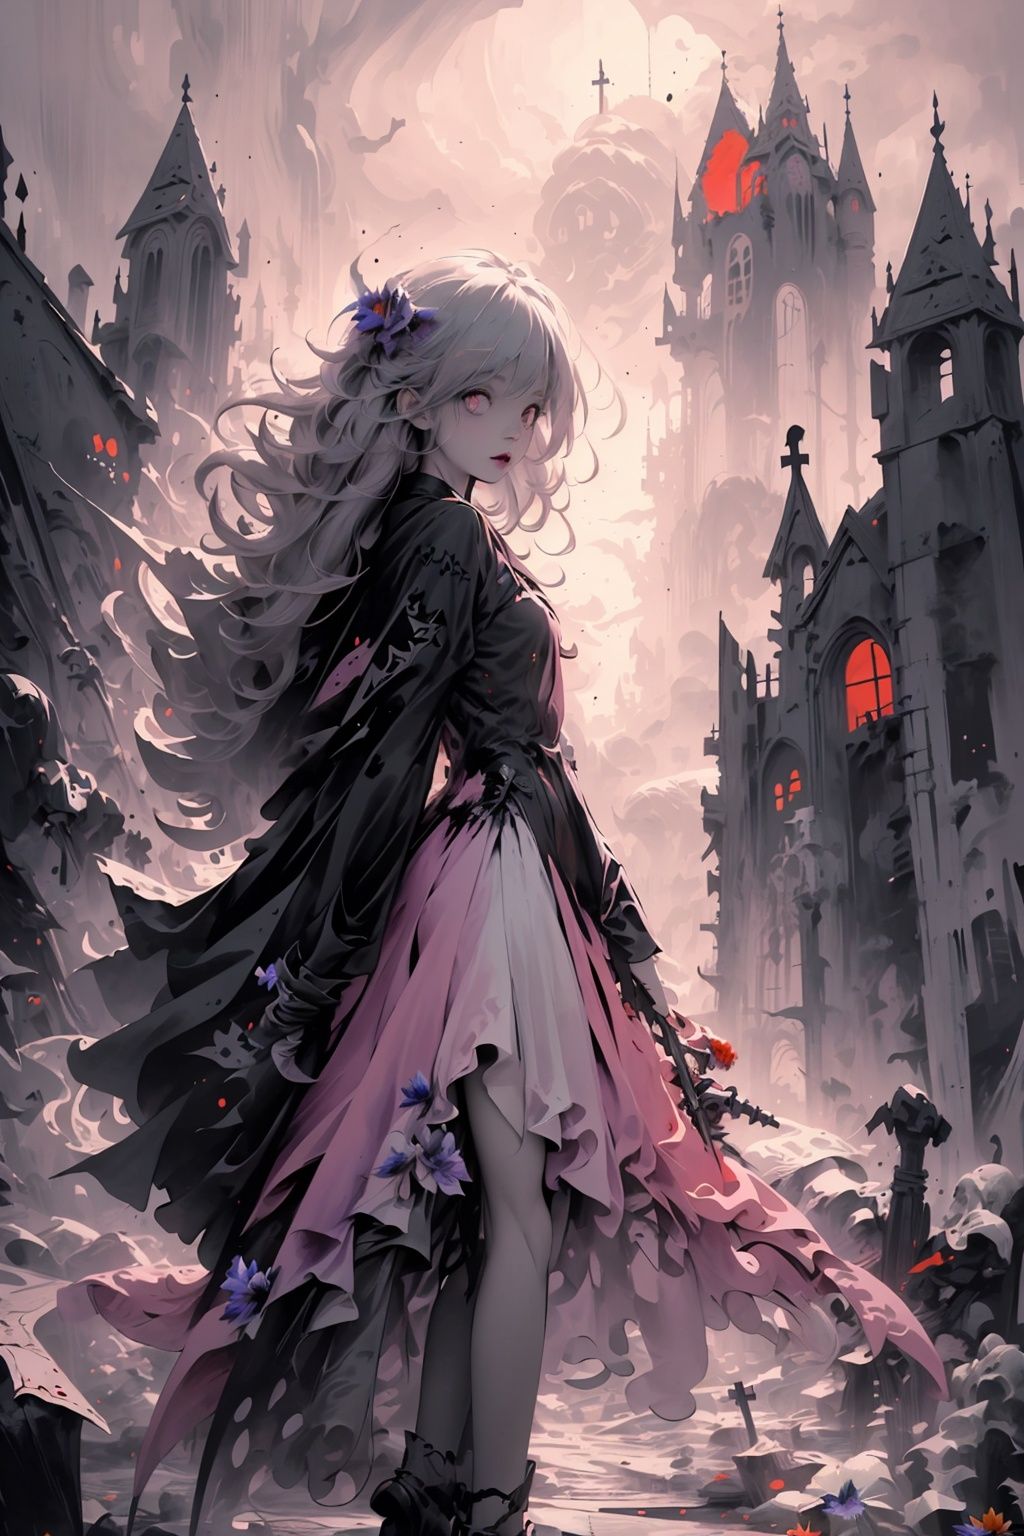 ((1girl,solo, alone, delicate face, cute, red eye pupil, pink eyelashes, red eye shadow, pink lips,excellent face,expression is enchanting,)), Character close-up,
leaning against the ruins, with a floating skeleton in the background,her posture is seductive,and there is a flicker of evil energy runes in the background, blood mist filled, and soft light. No shoes,My feet are covered in bones. Skeletons, many skeletons. Official art, unit 8 k wallpaper, ultra detailed, beautiful and aesthetic, masterpiece, best quality, extremely detailed, dynamic angle, paper skin, radius, iuminosity, cowboyshot, the most beautiful form of Chaos, elegant, a brutalist designed, visual colors, romanticism, by James Jean, roby dwi antono, cross tran, francis bacon, Michael mraz, Adrian ghenie, Petra cortright, Gerhard richter, Takato yamamoto, ashley wood, atmospheric, ((late at night,dark)), light rain,dark, limited palette, contrast,(((Cornflower))), corn